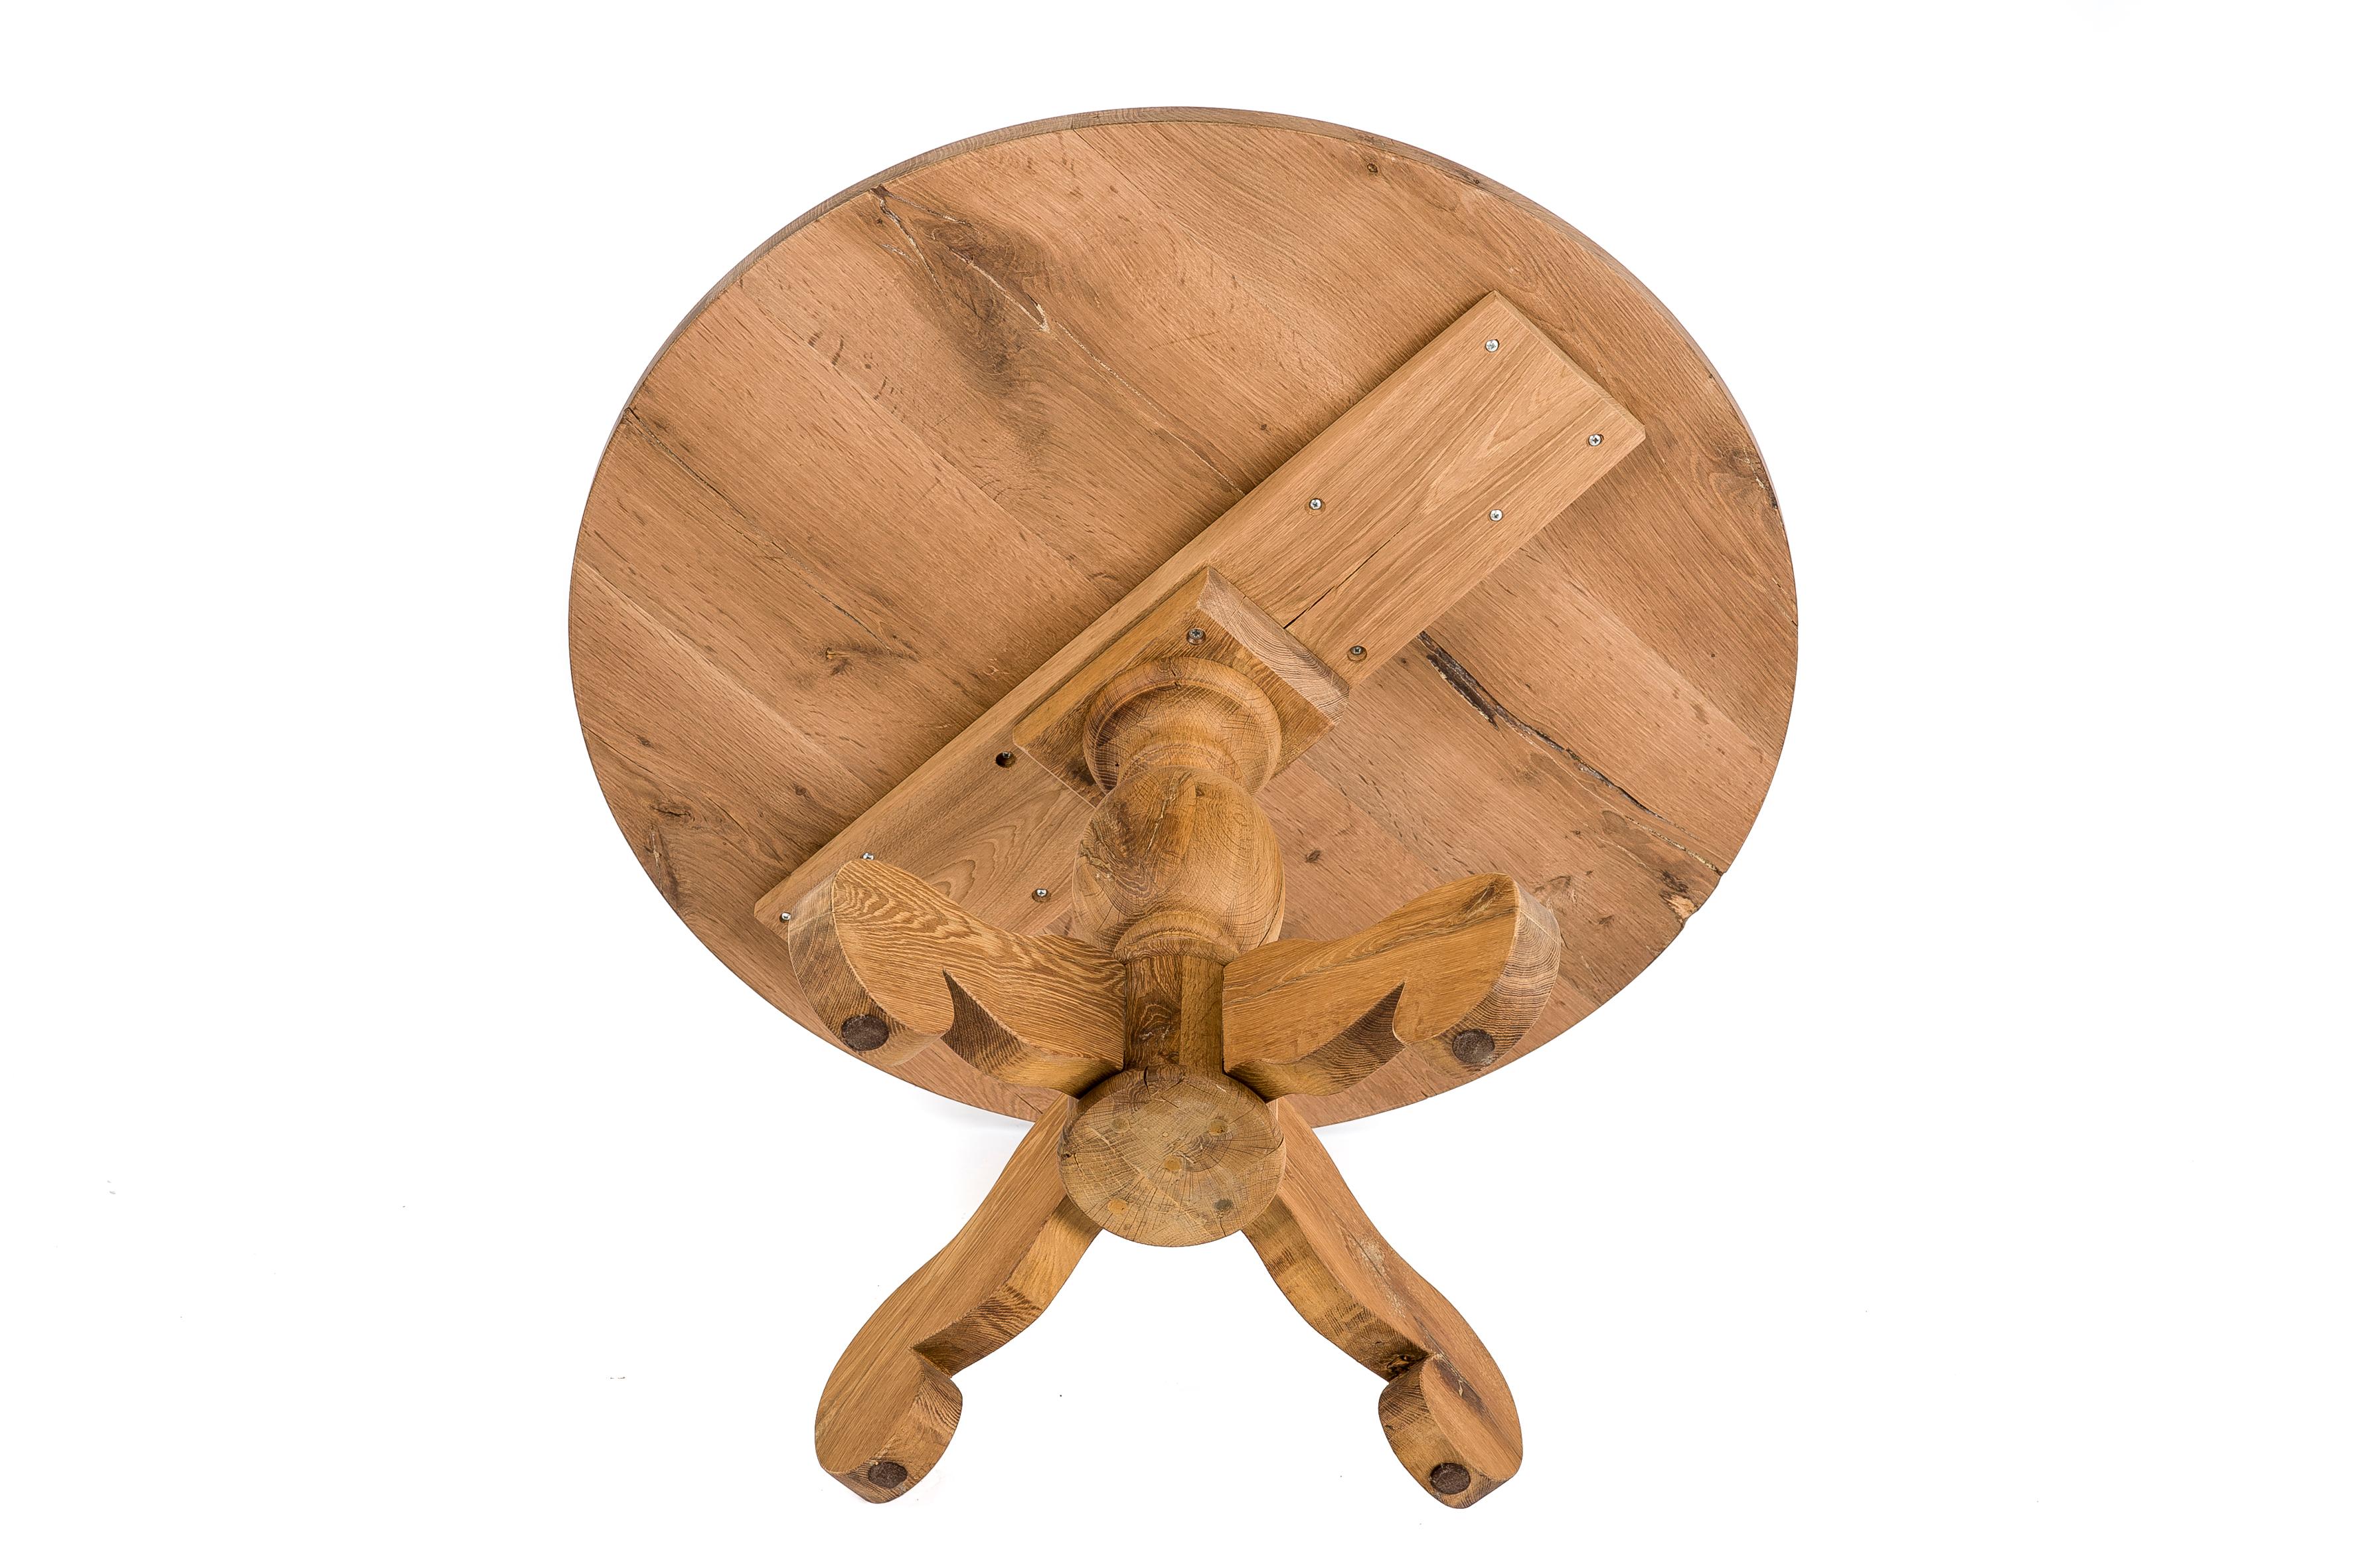 Bespoke Rustic Solid Aged Oak Round Dining Table in Natural Matt Finish 2